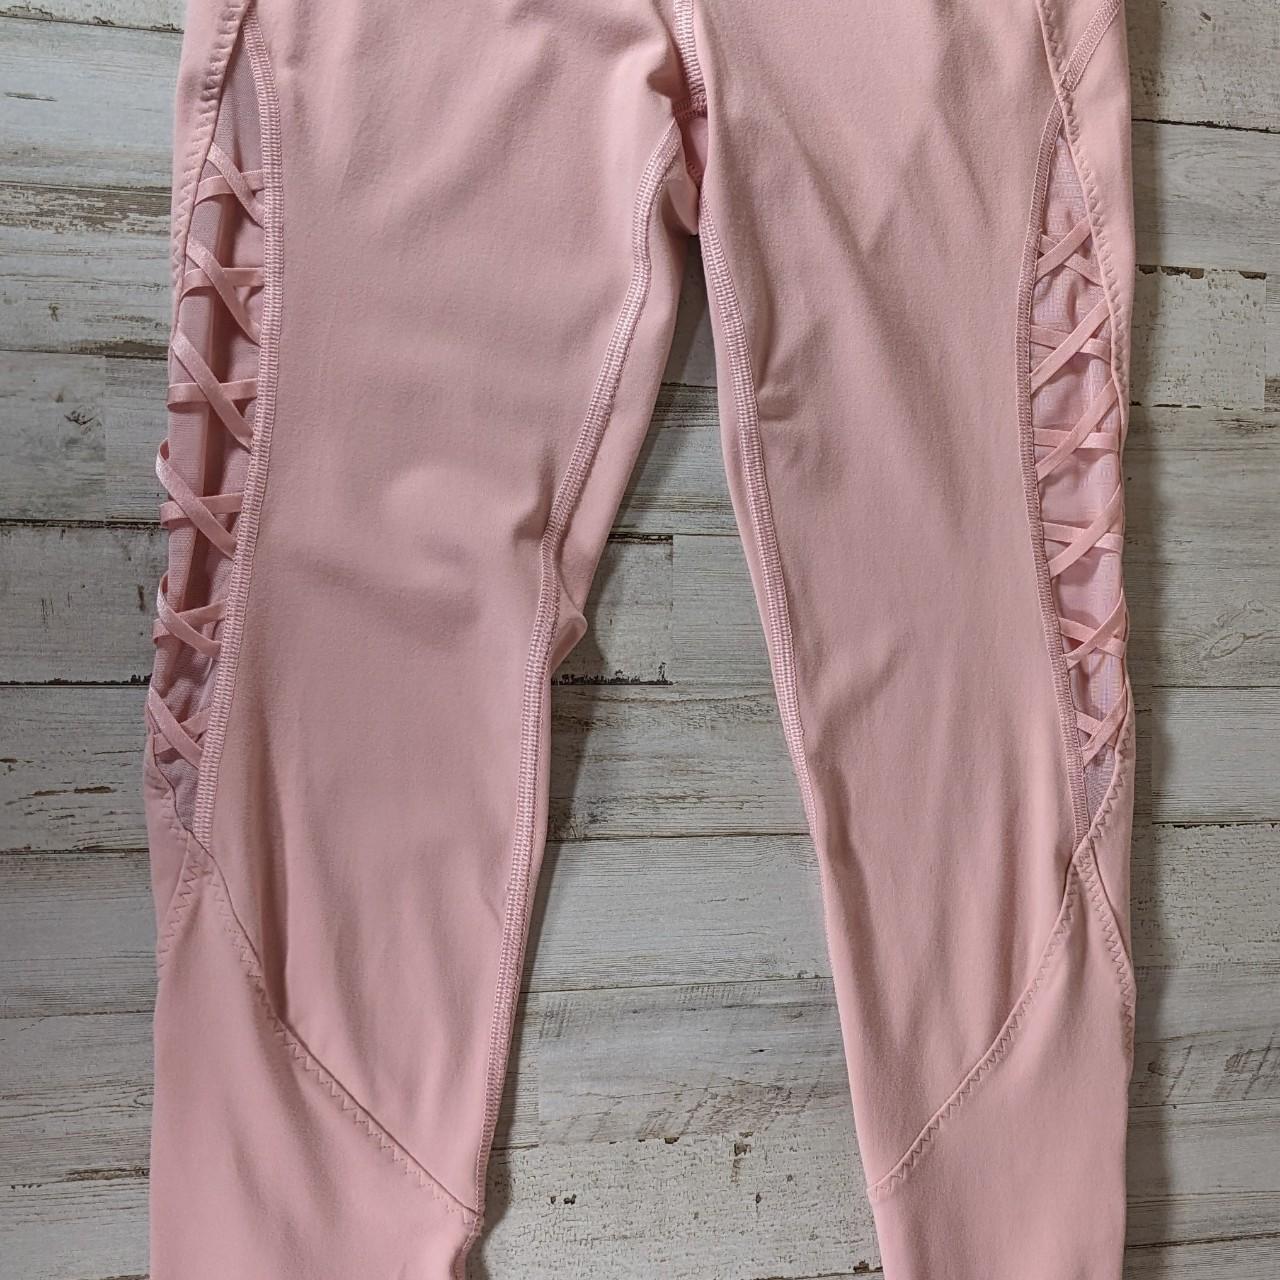 Victoria Sports Size XS High Waisted Pink Knockout